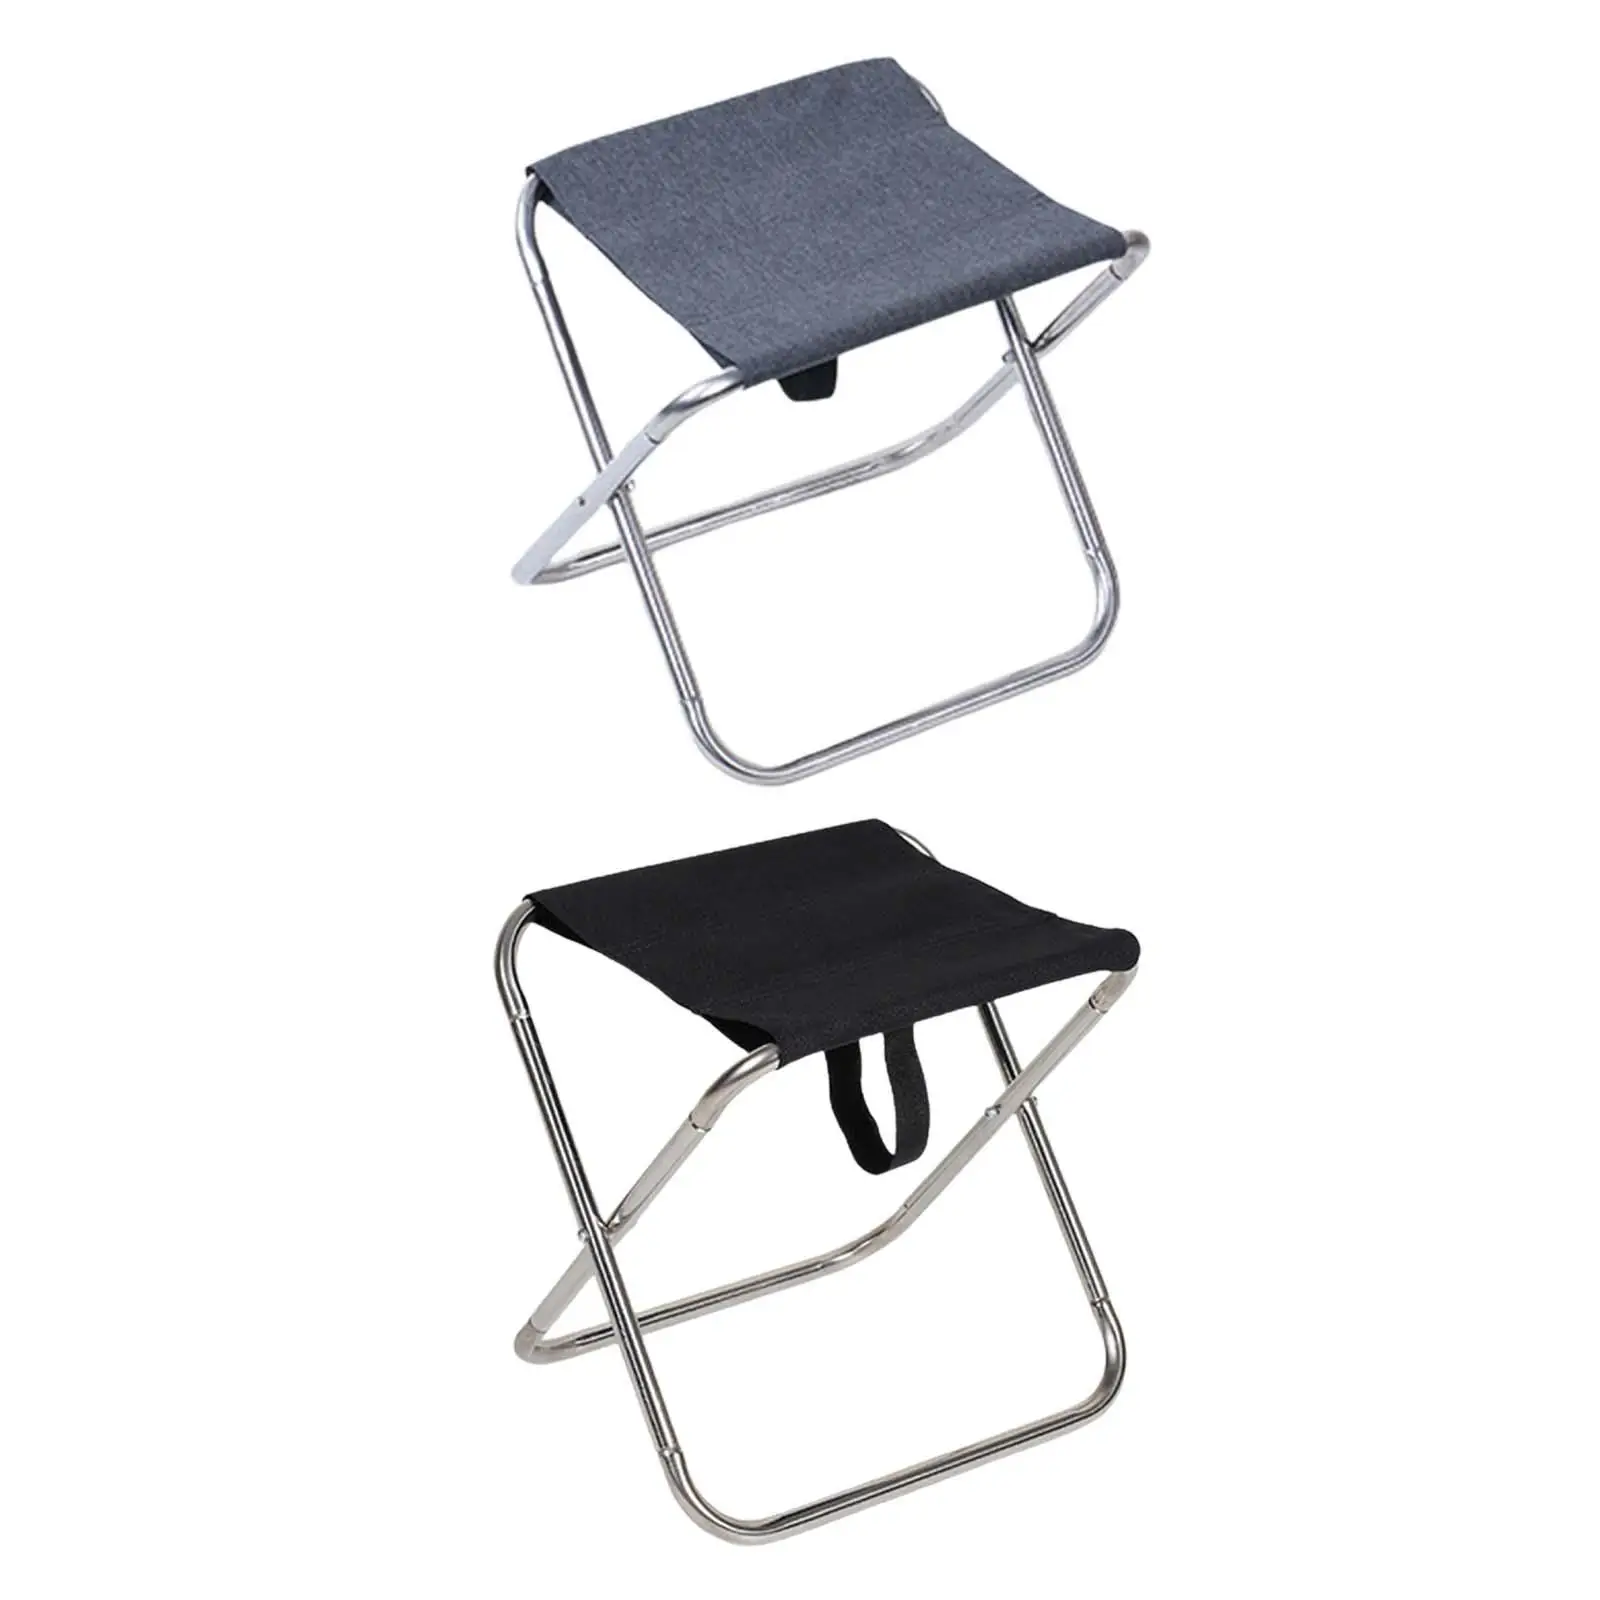 Camping Stool Folding Foldable Picnic Chair Ultralight Camp Stool Mini Saddle Chair for Gardening Barbecue Travel Concert Picnic